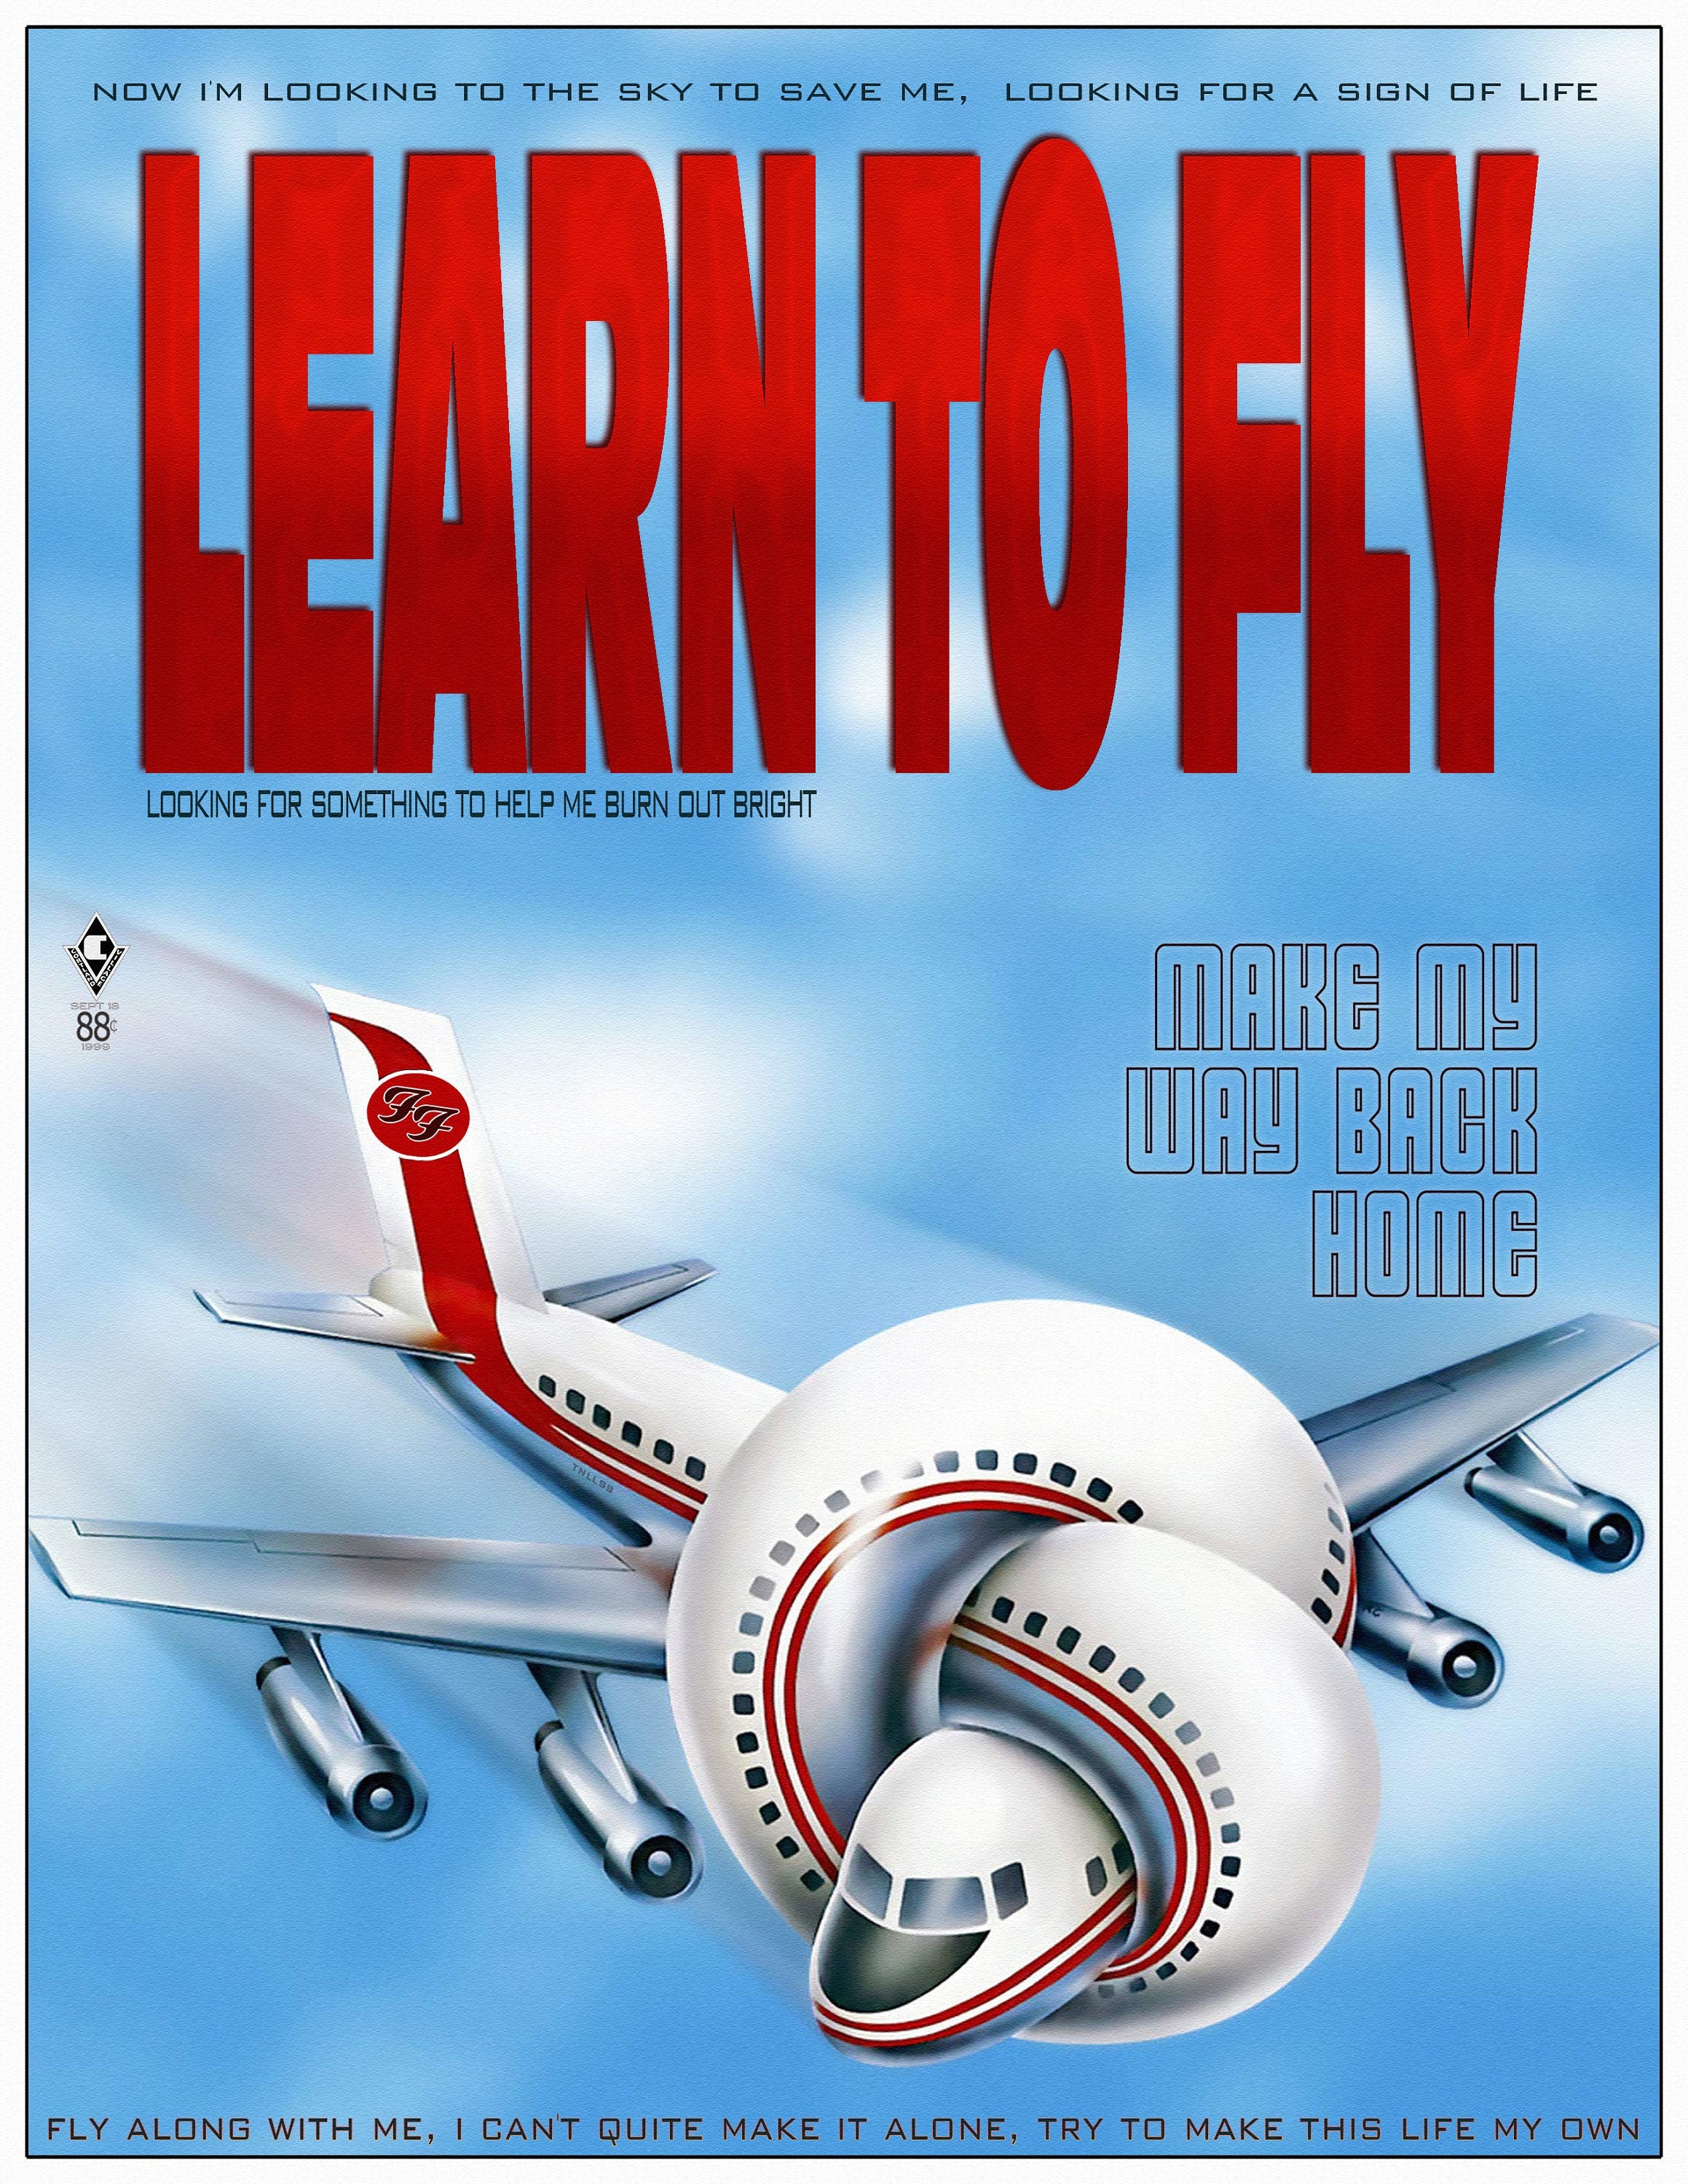 Foo Fighters: Learning to Fly